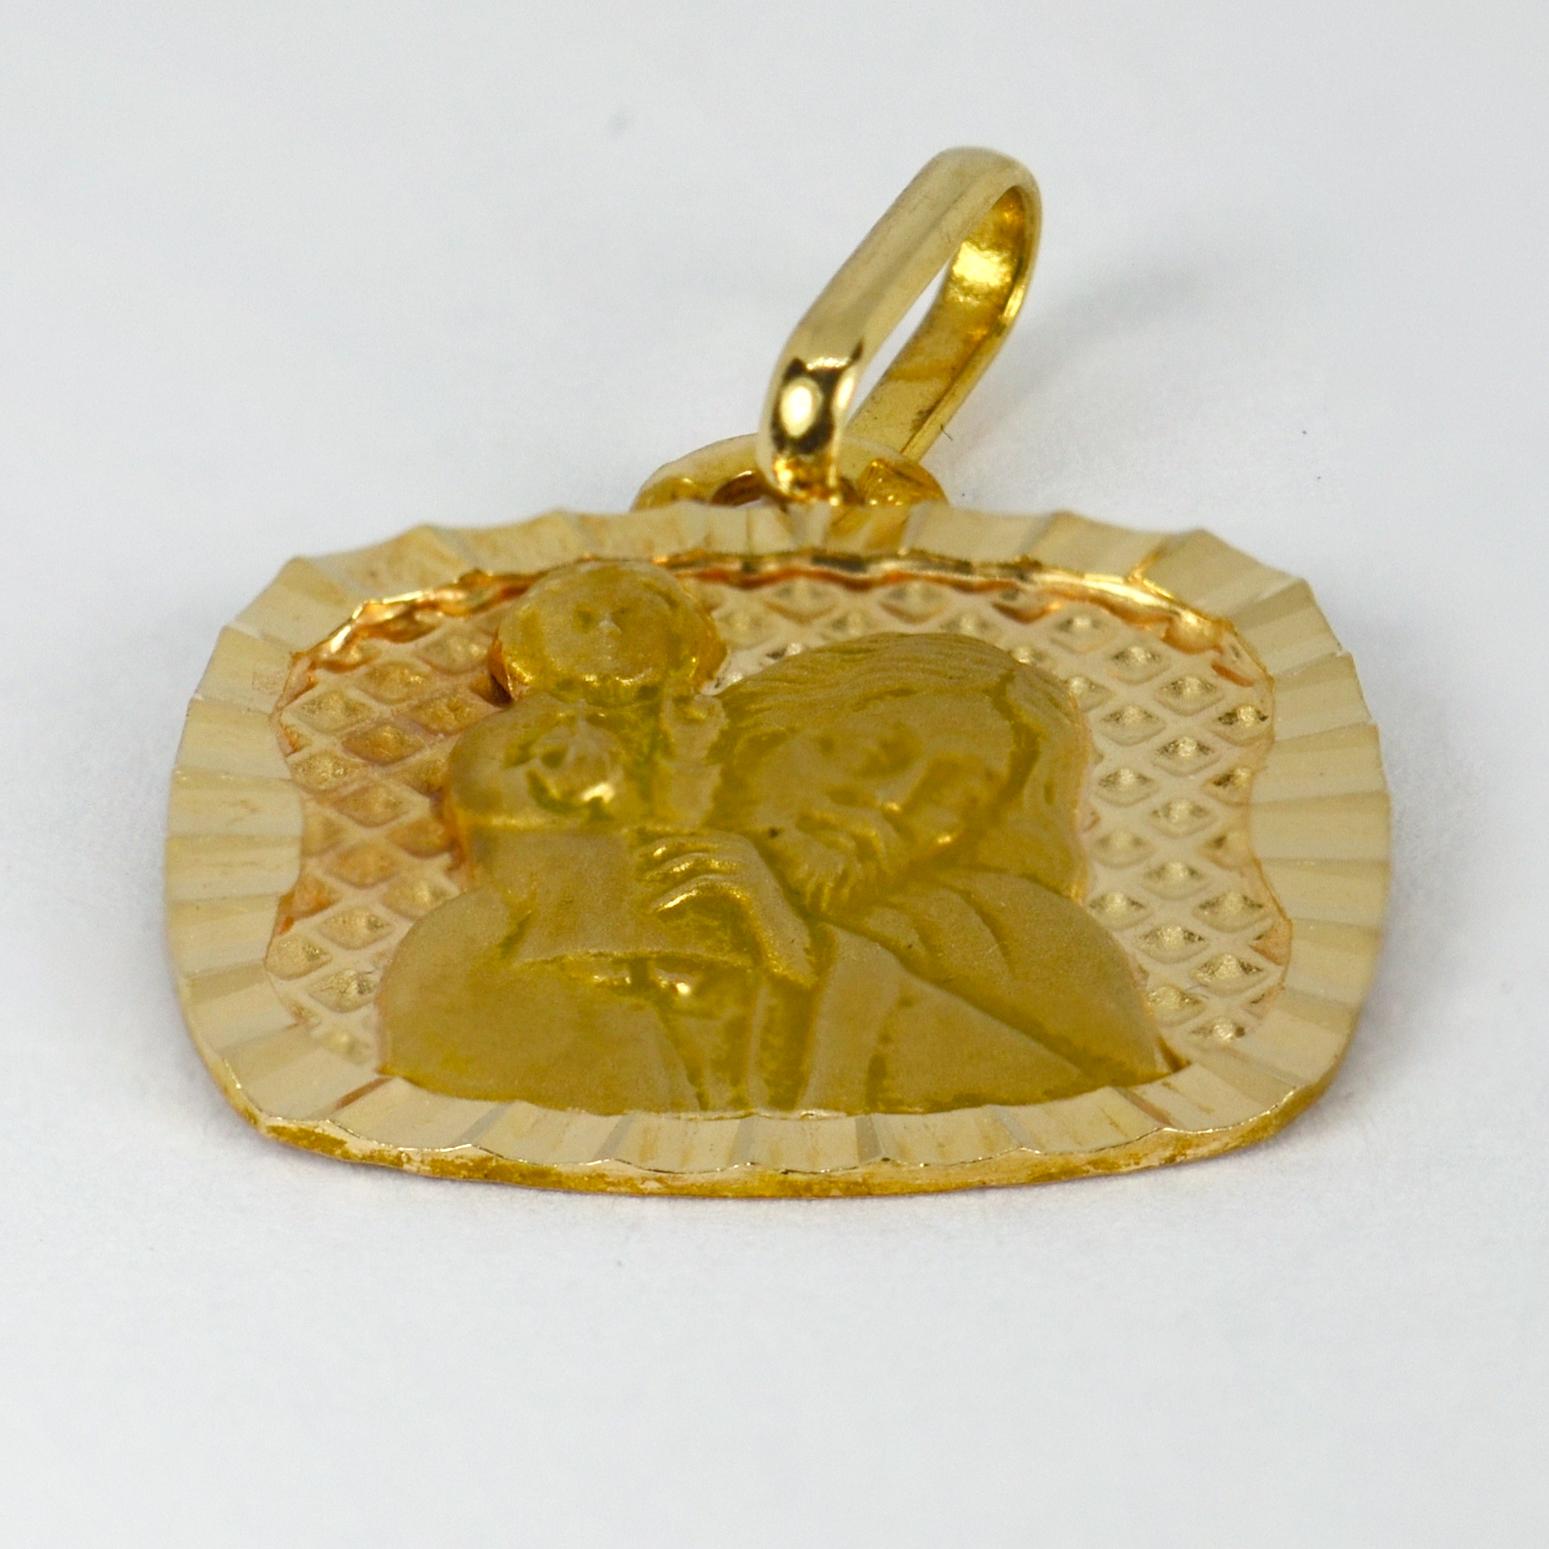 A French 18 karat (18K) yellow gold charm pendant designed as a medal depicting Saint Christopher carrying the infant Christ. Stamped with the eagles head for 18 karat gold and French manufacture and an unknown makers mark.

Dimensions: 1.8 x 1.6 x